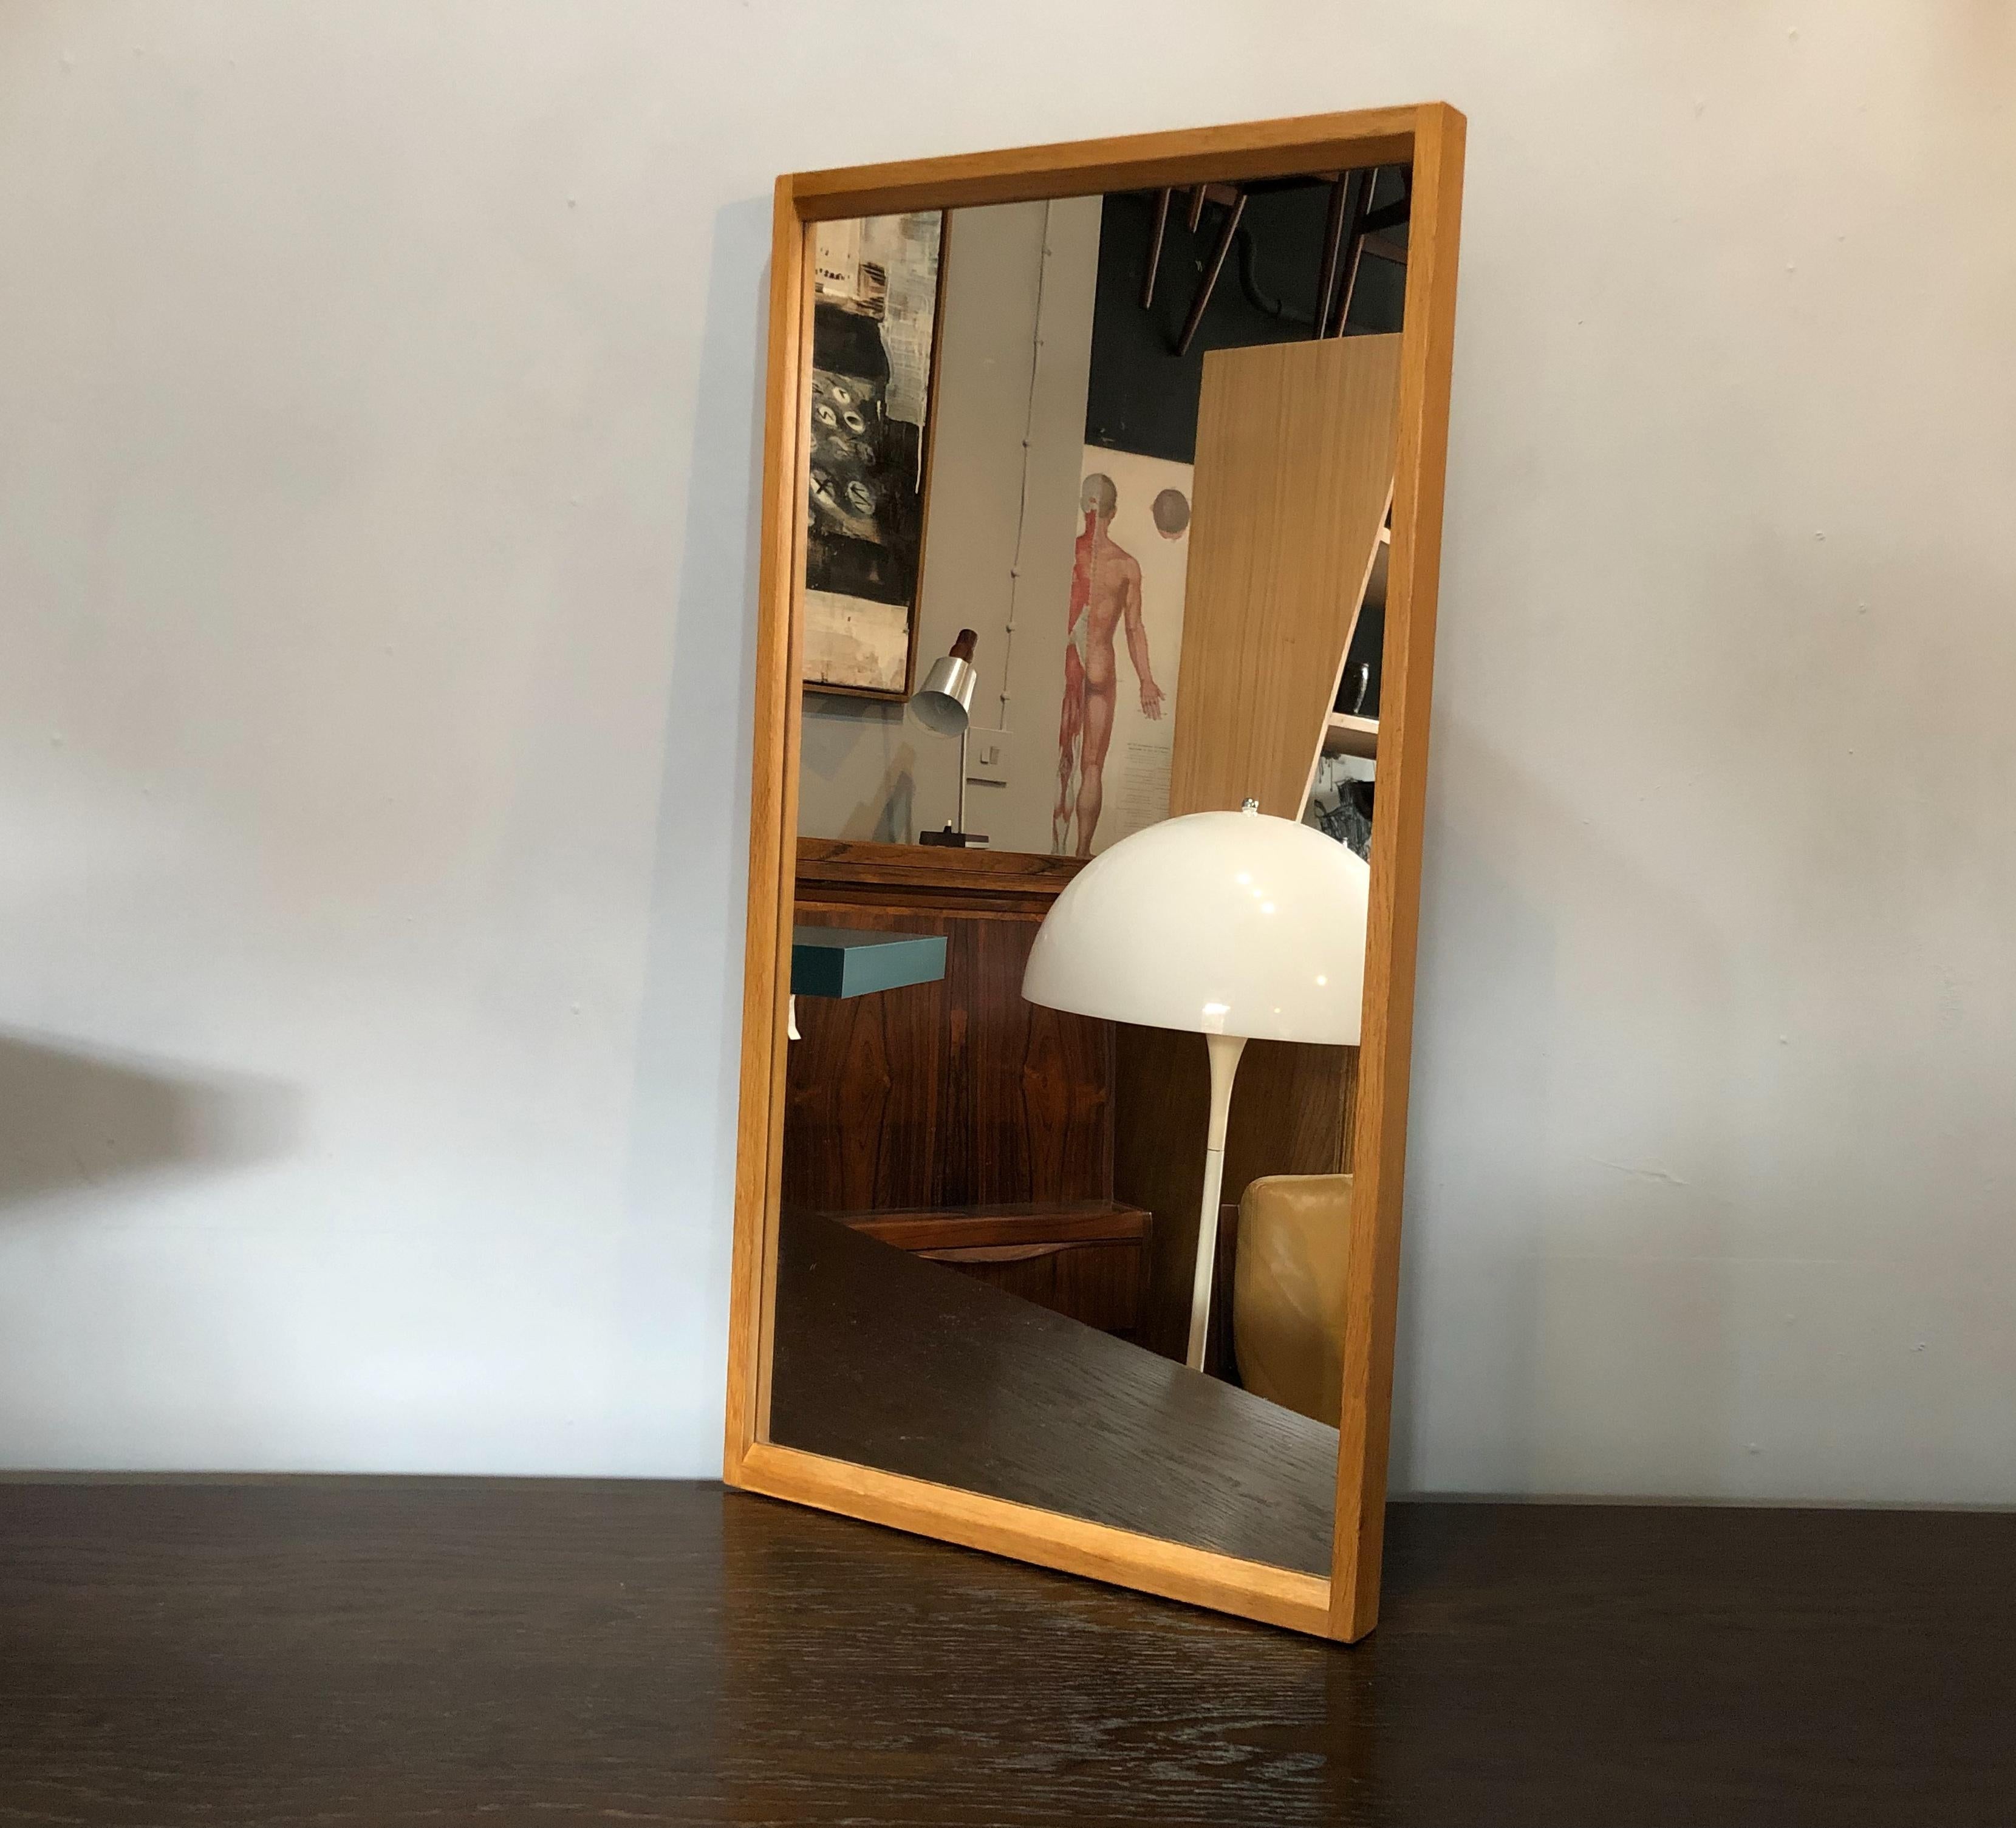 Typically stylish design from Aksel Kjersgaard. Wonderful hardwood frame. In excellent condition.
Produced by Odder, Denmark, circa 1960. Floor standing or wall mountable.